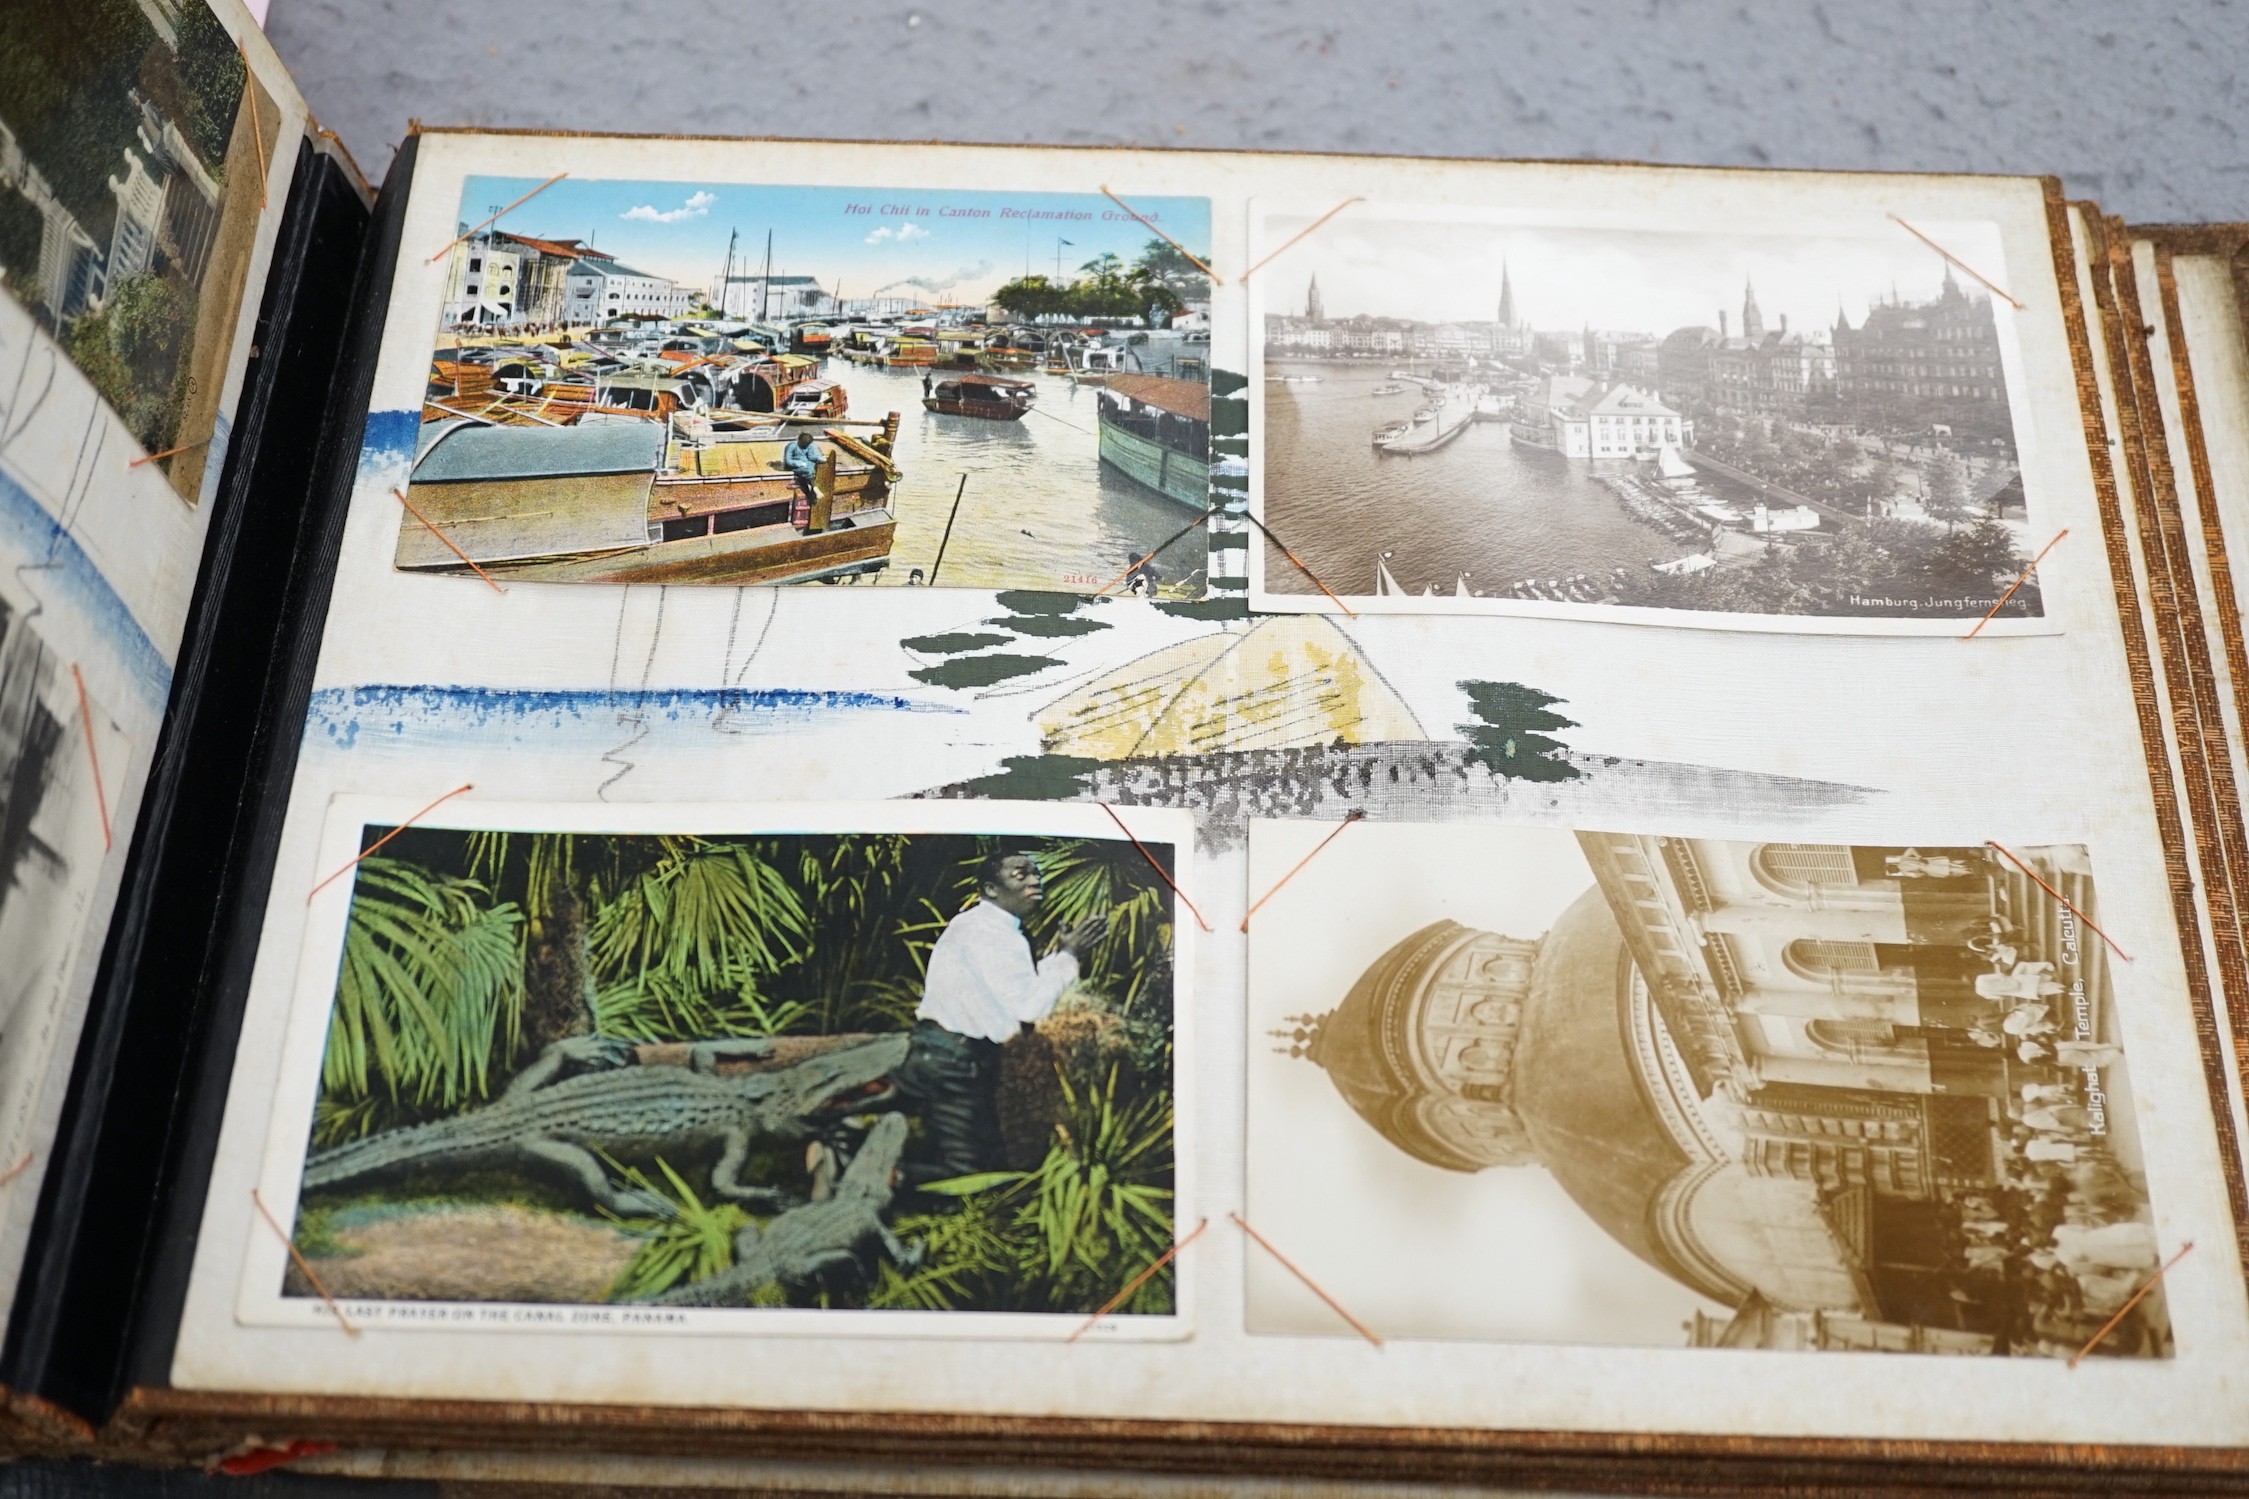 An early 20th century inlaid postcard album and contents